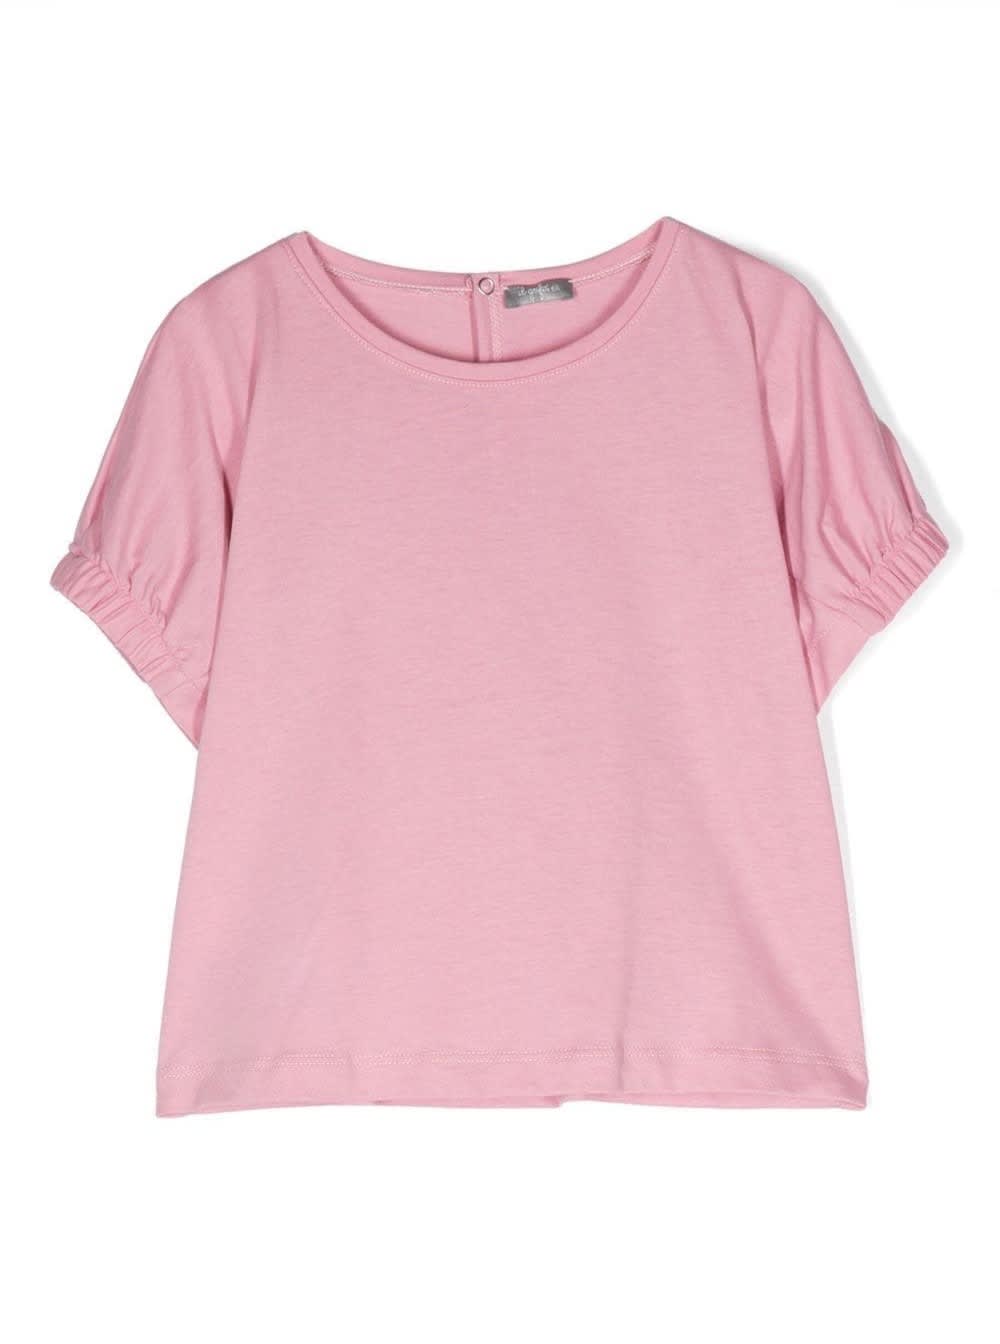 IL GUFO PINK T-SHIRT WITH PUFF SLEEVES IN COTTON GIRL